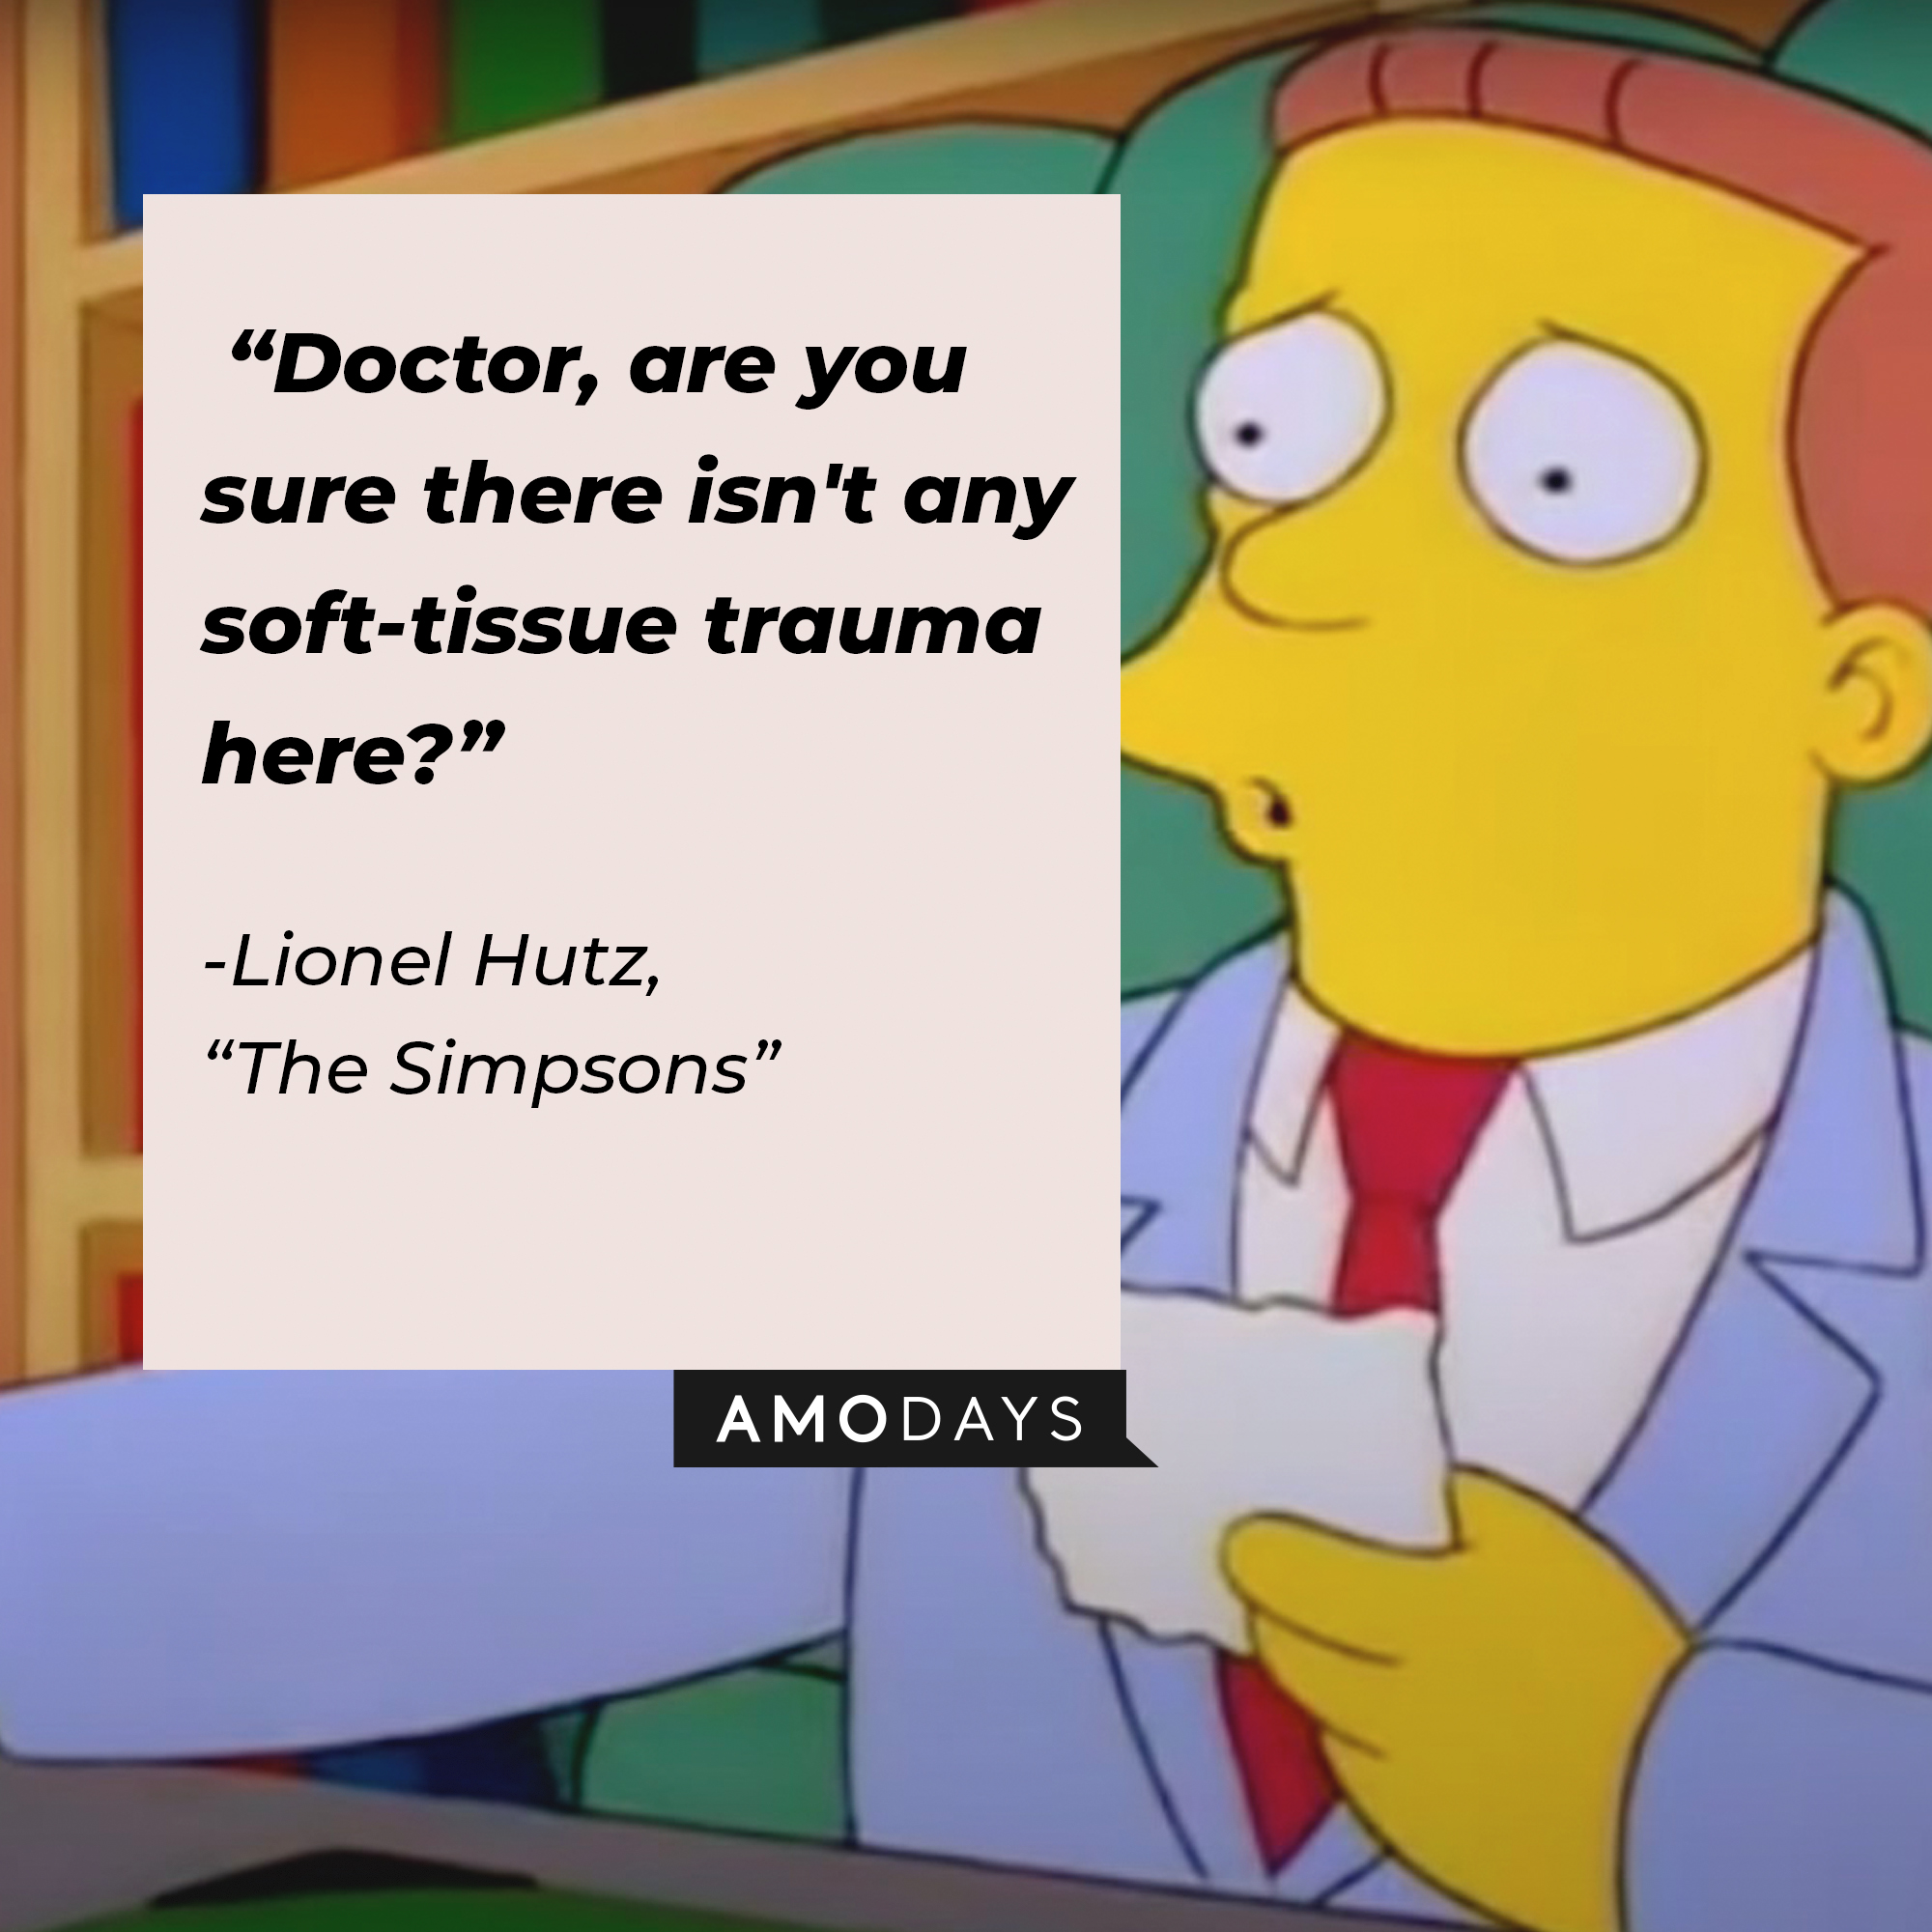 Lionel Hutz’s quote from “The Simpsons”: “Doctor, are you sure there isn't any soft-tissue trauma here?” | Source: facebook.com/TheSimpsons